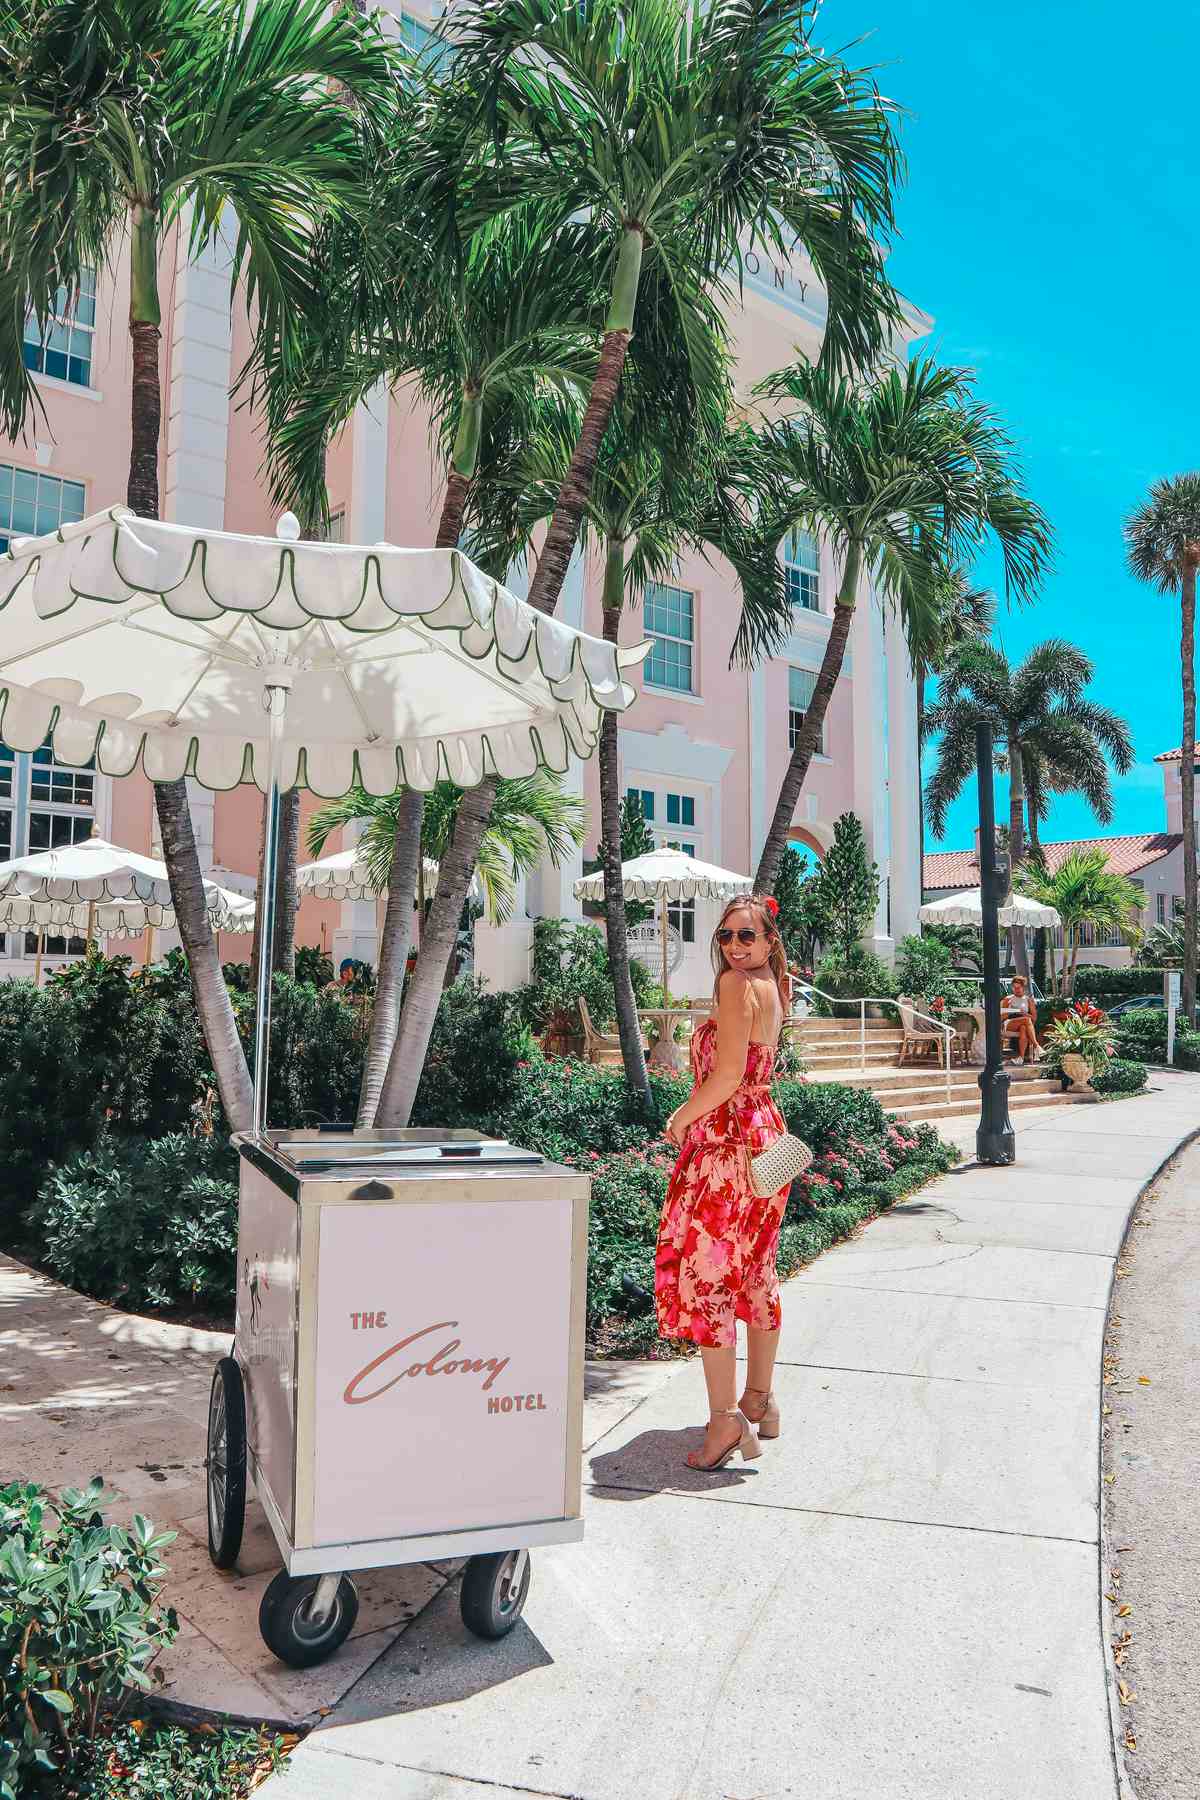 Walking up to The Colony Hotel in Palm Beach